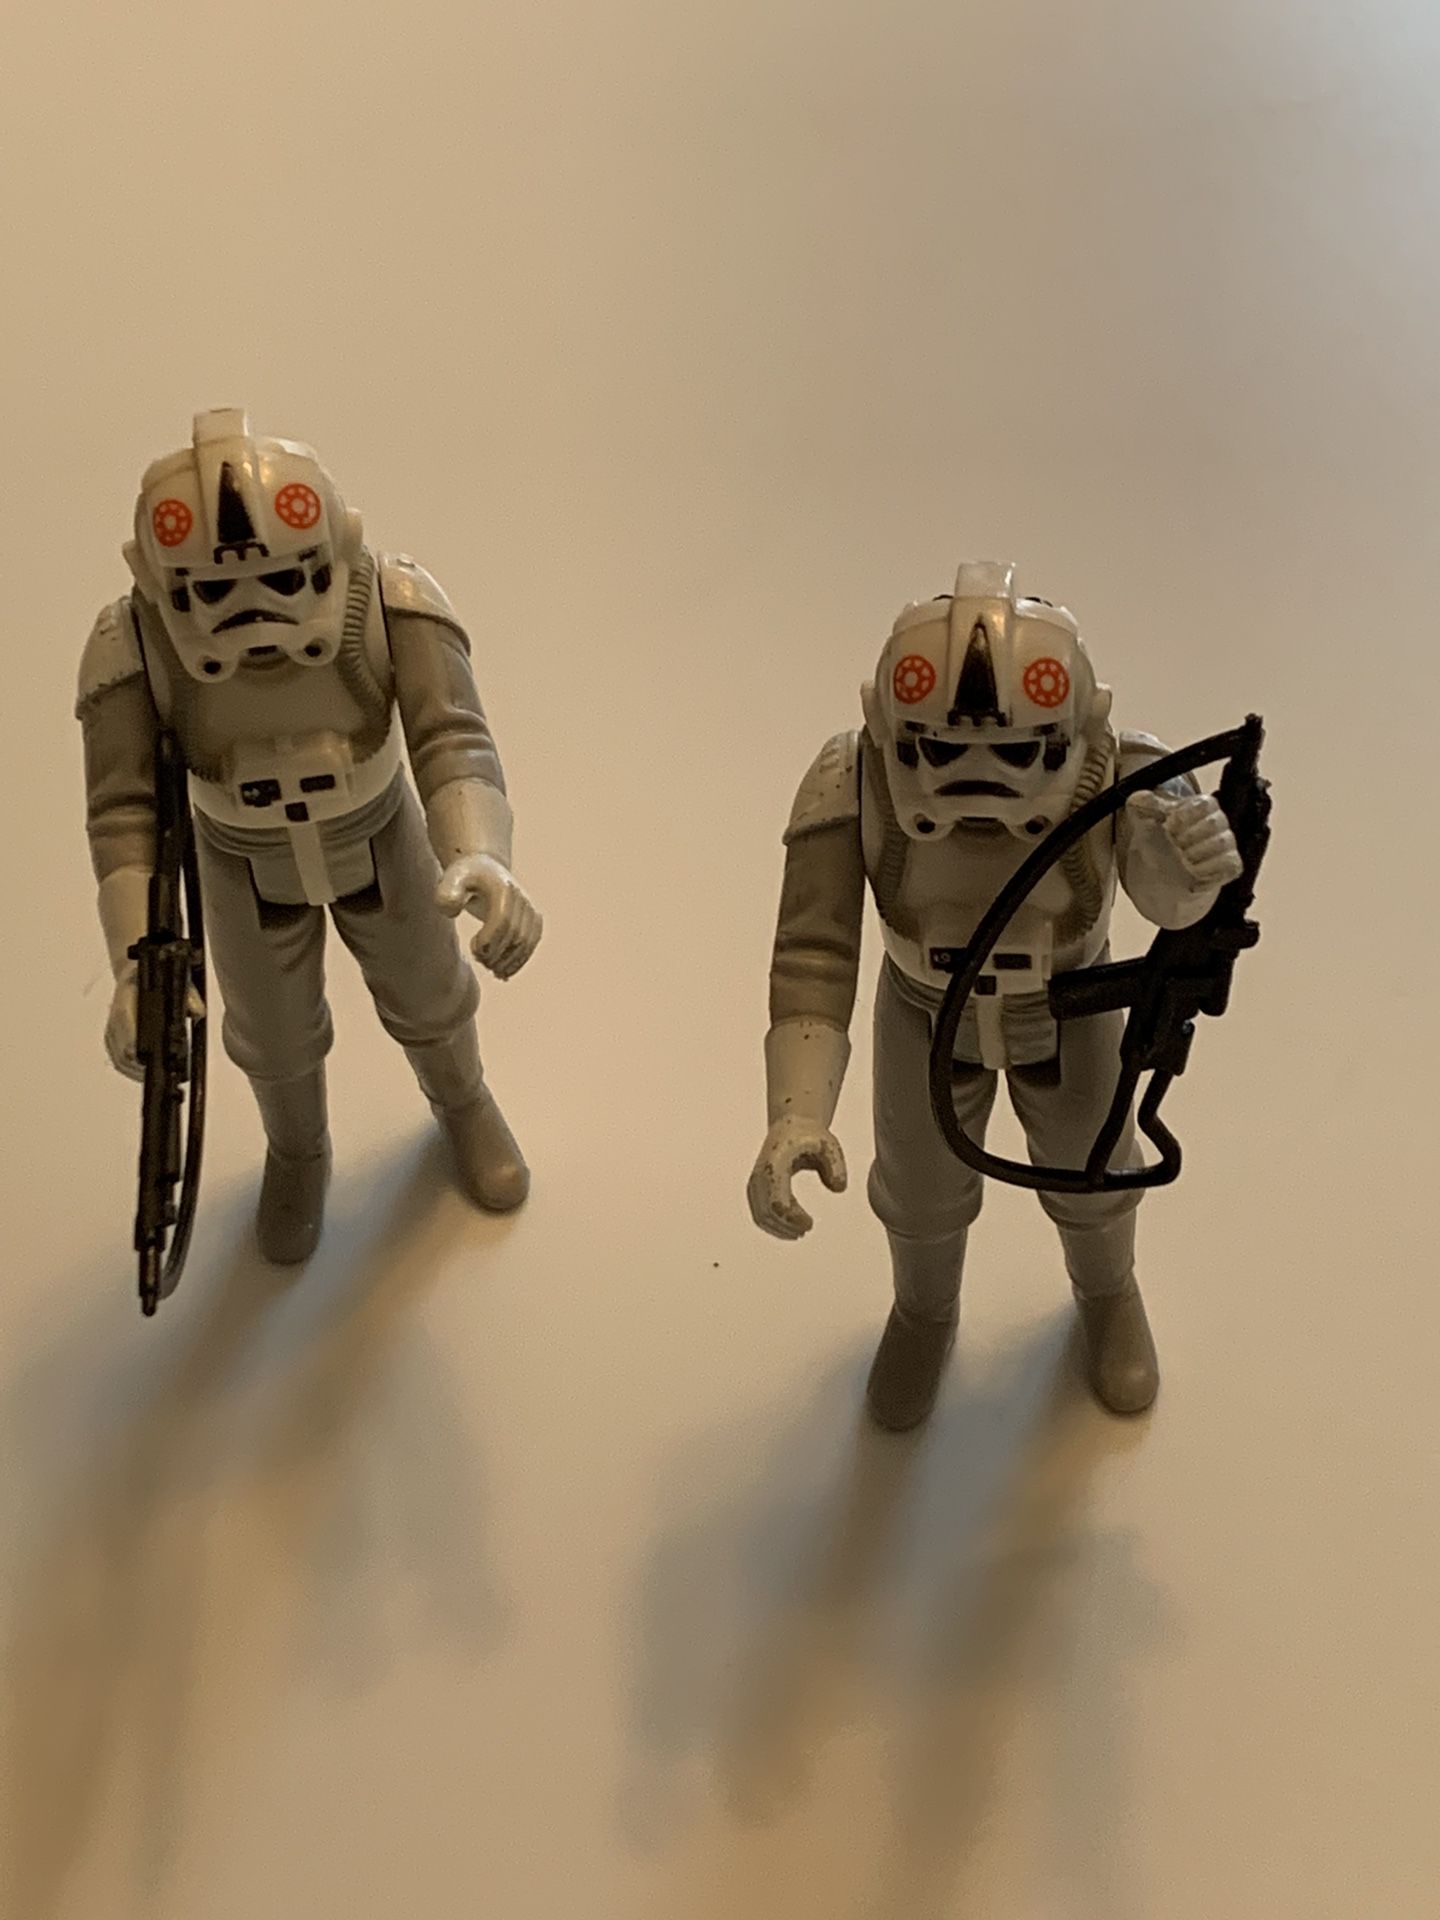 STAR WARS “AT-AT DRIVERS” from 1980 —COMPLETE with WEAPONS—ORIGINAL 